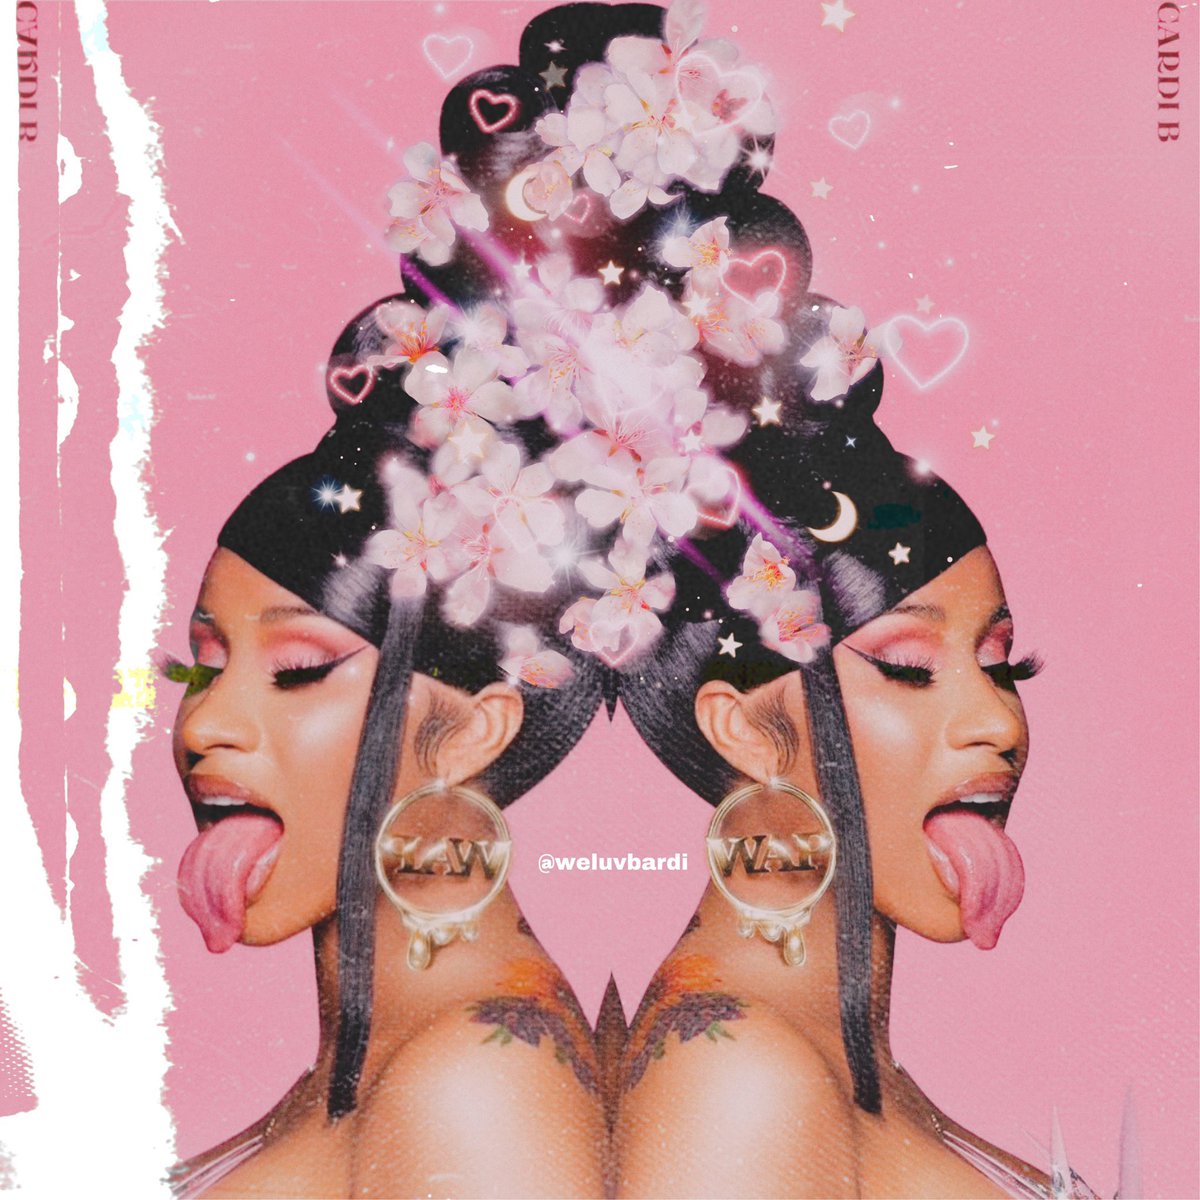 Cardi’s new single WAP fr. Megan Thee Stallion fan edited art cover thread. Get the Limited Edition Song at:  http://CardiB.com 